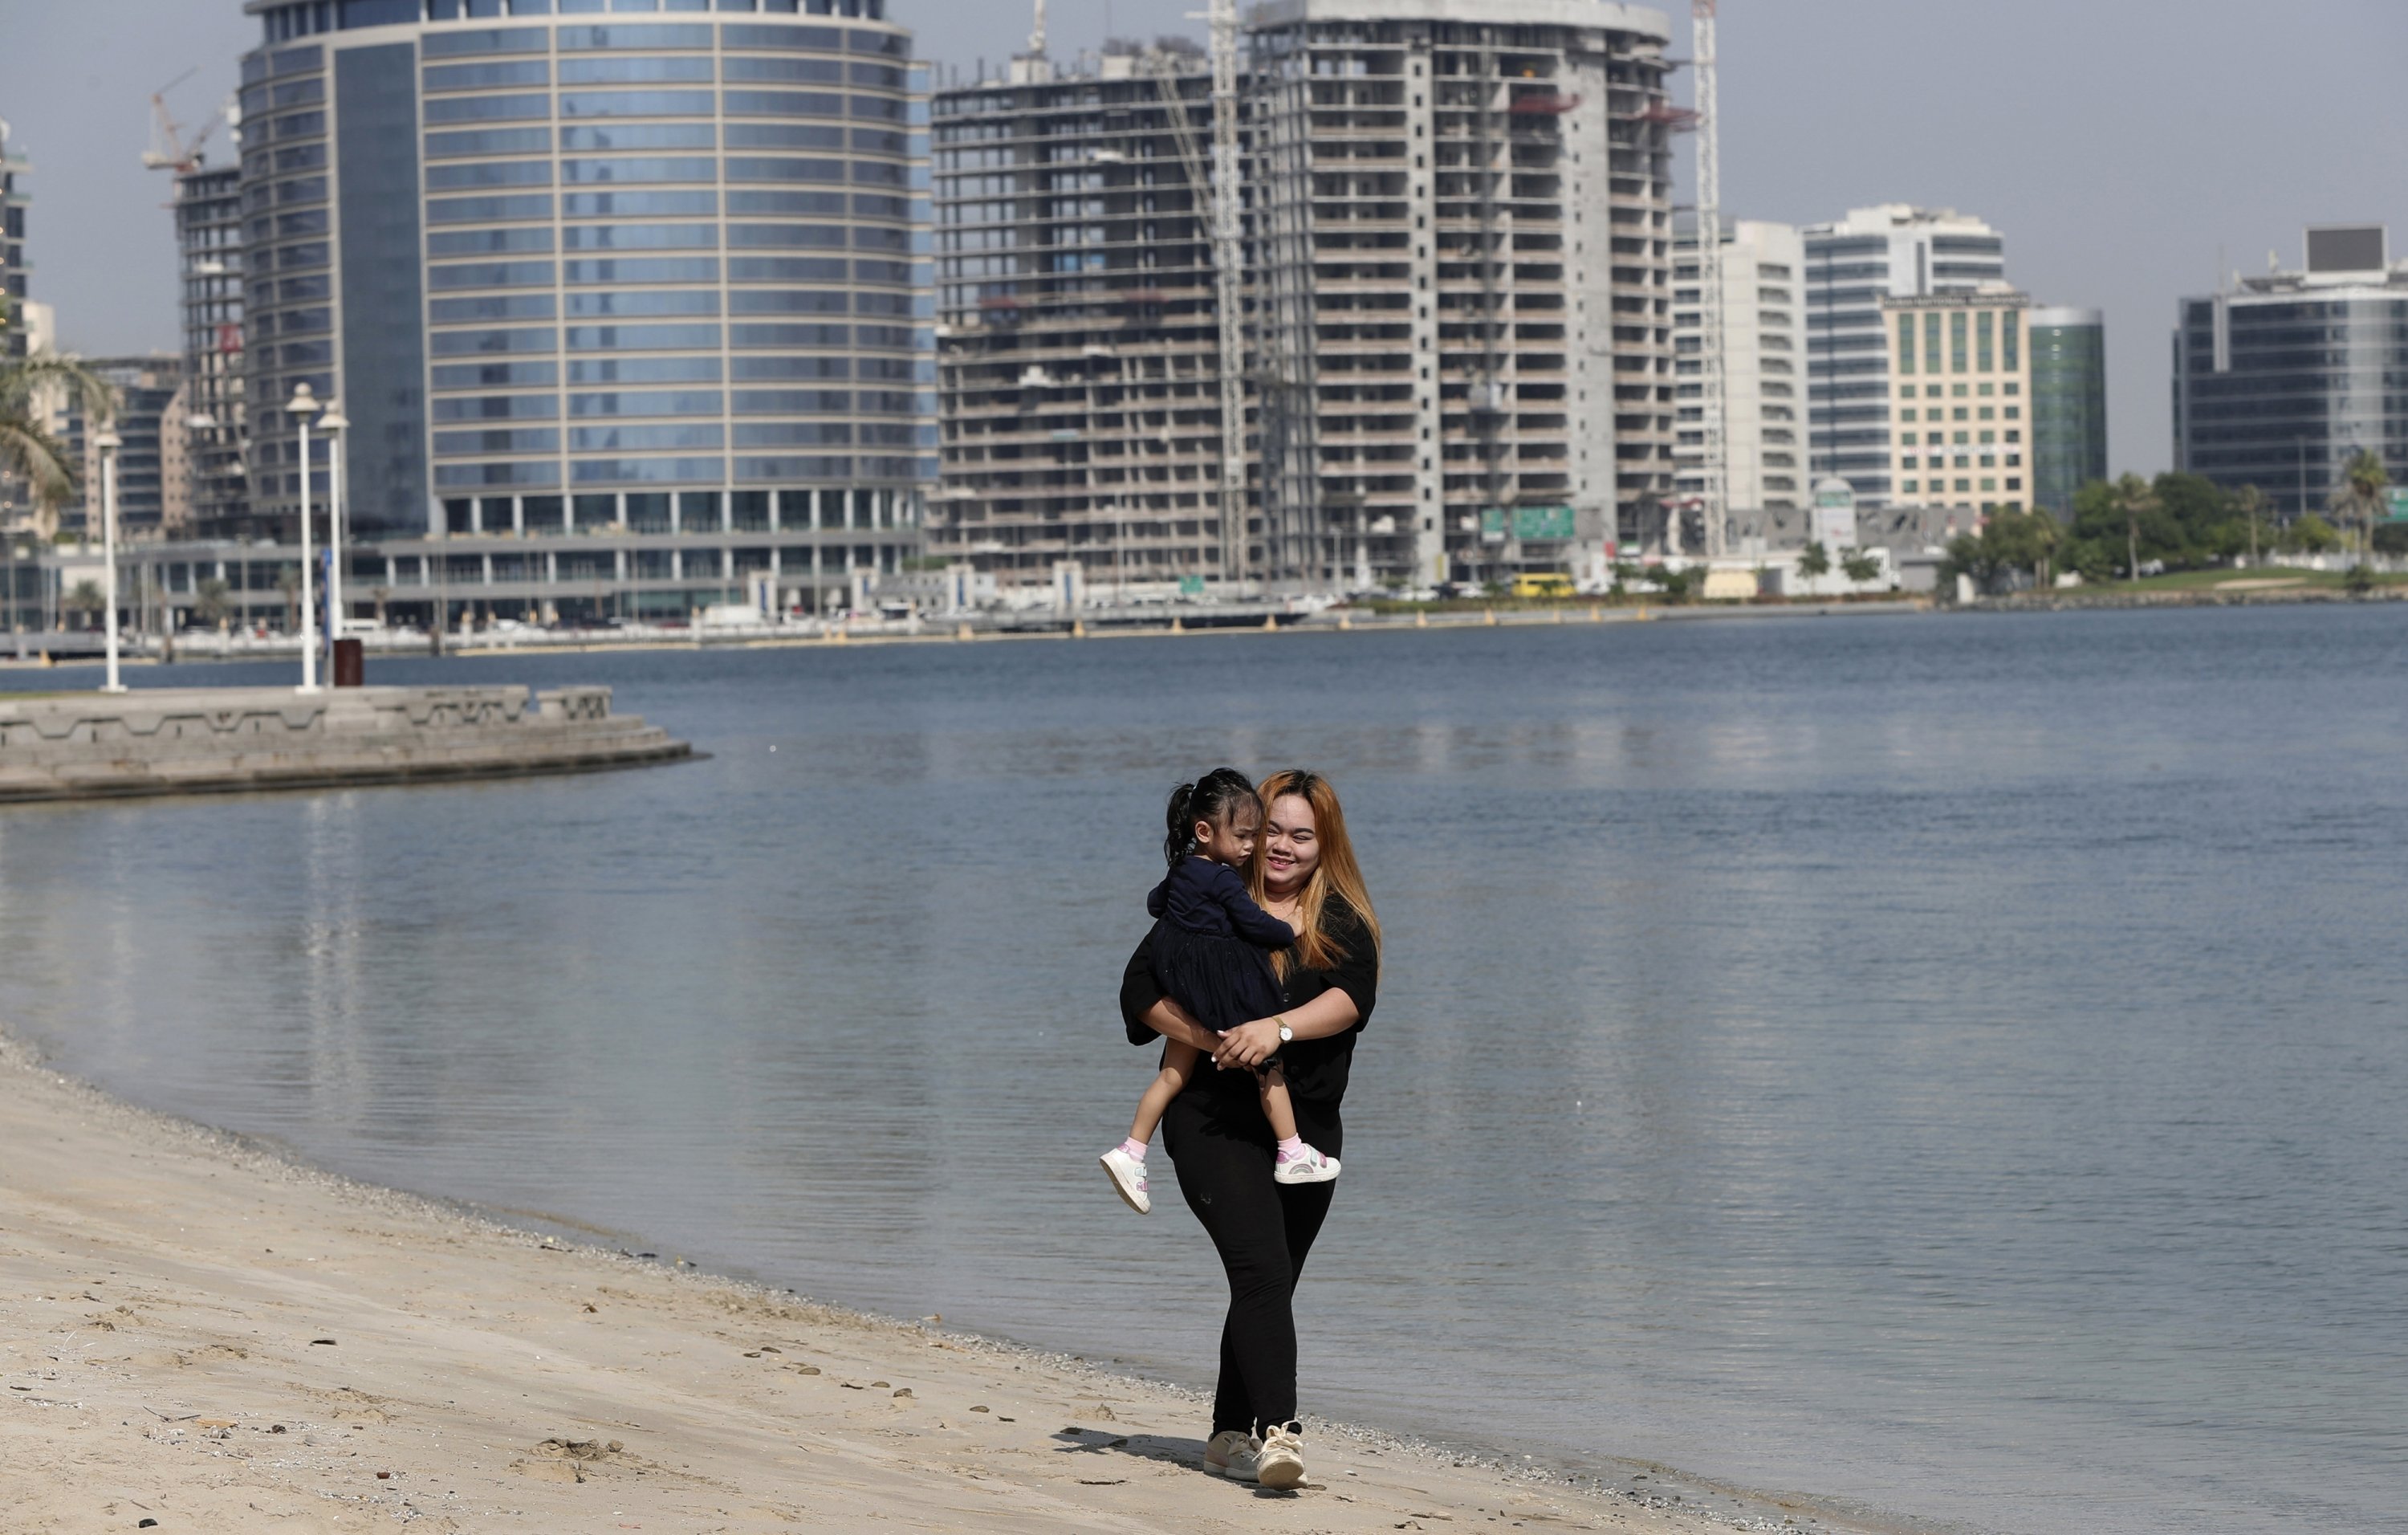 Sitte Honey, 25, carries her 2-year-old undocumented daughter Naya at a park in Dubai, United Arab Emirates, Nov. 23, 2021. (AP Photo)